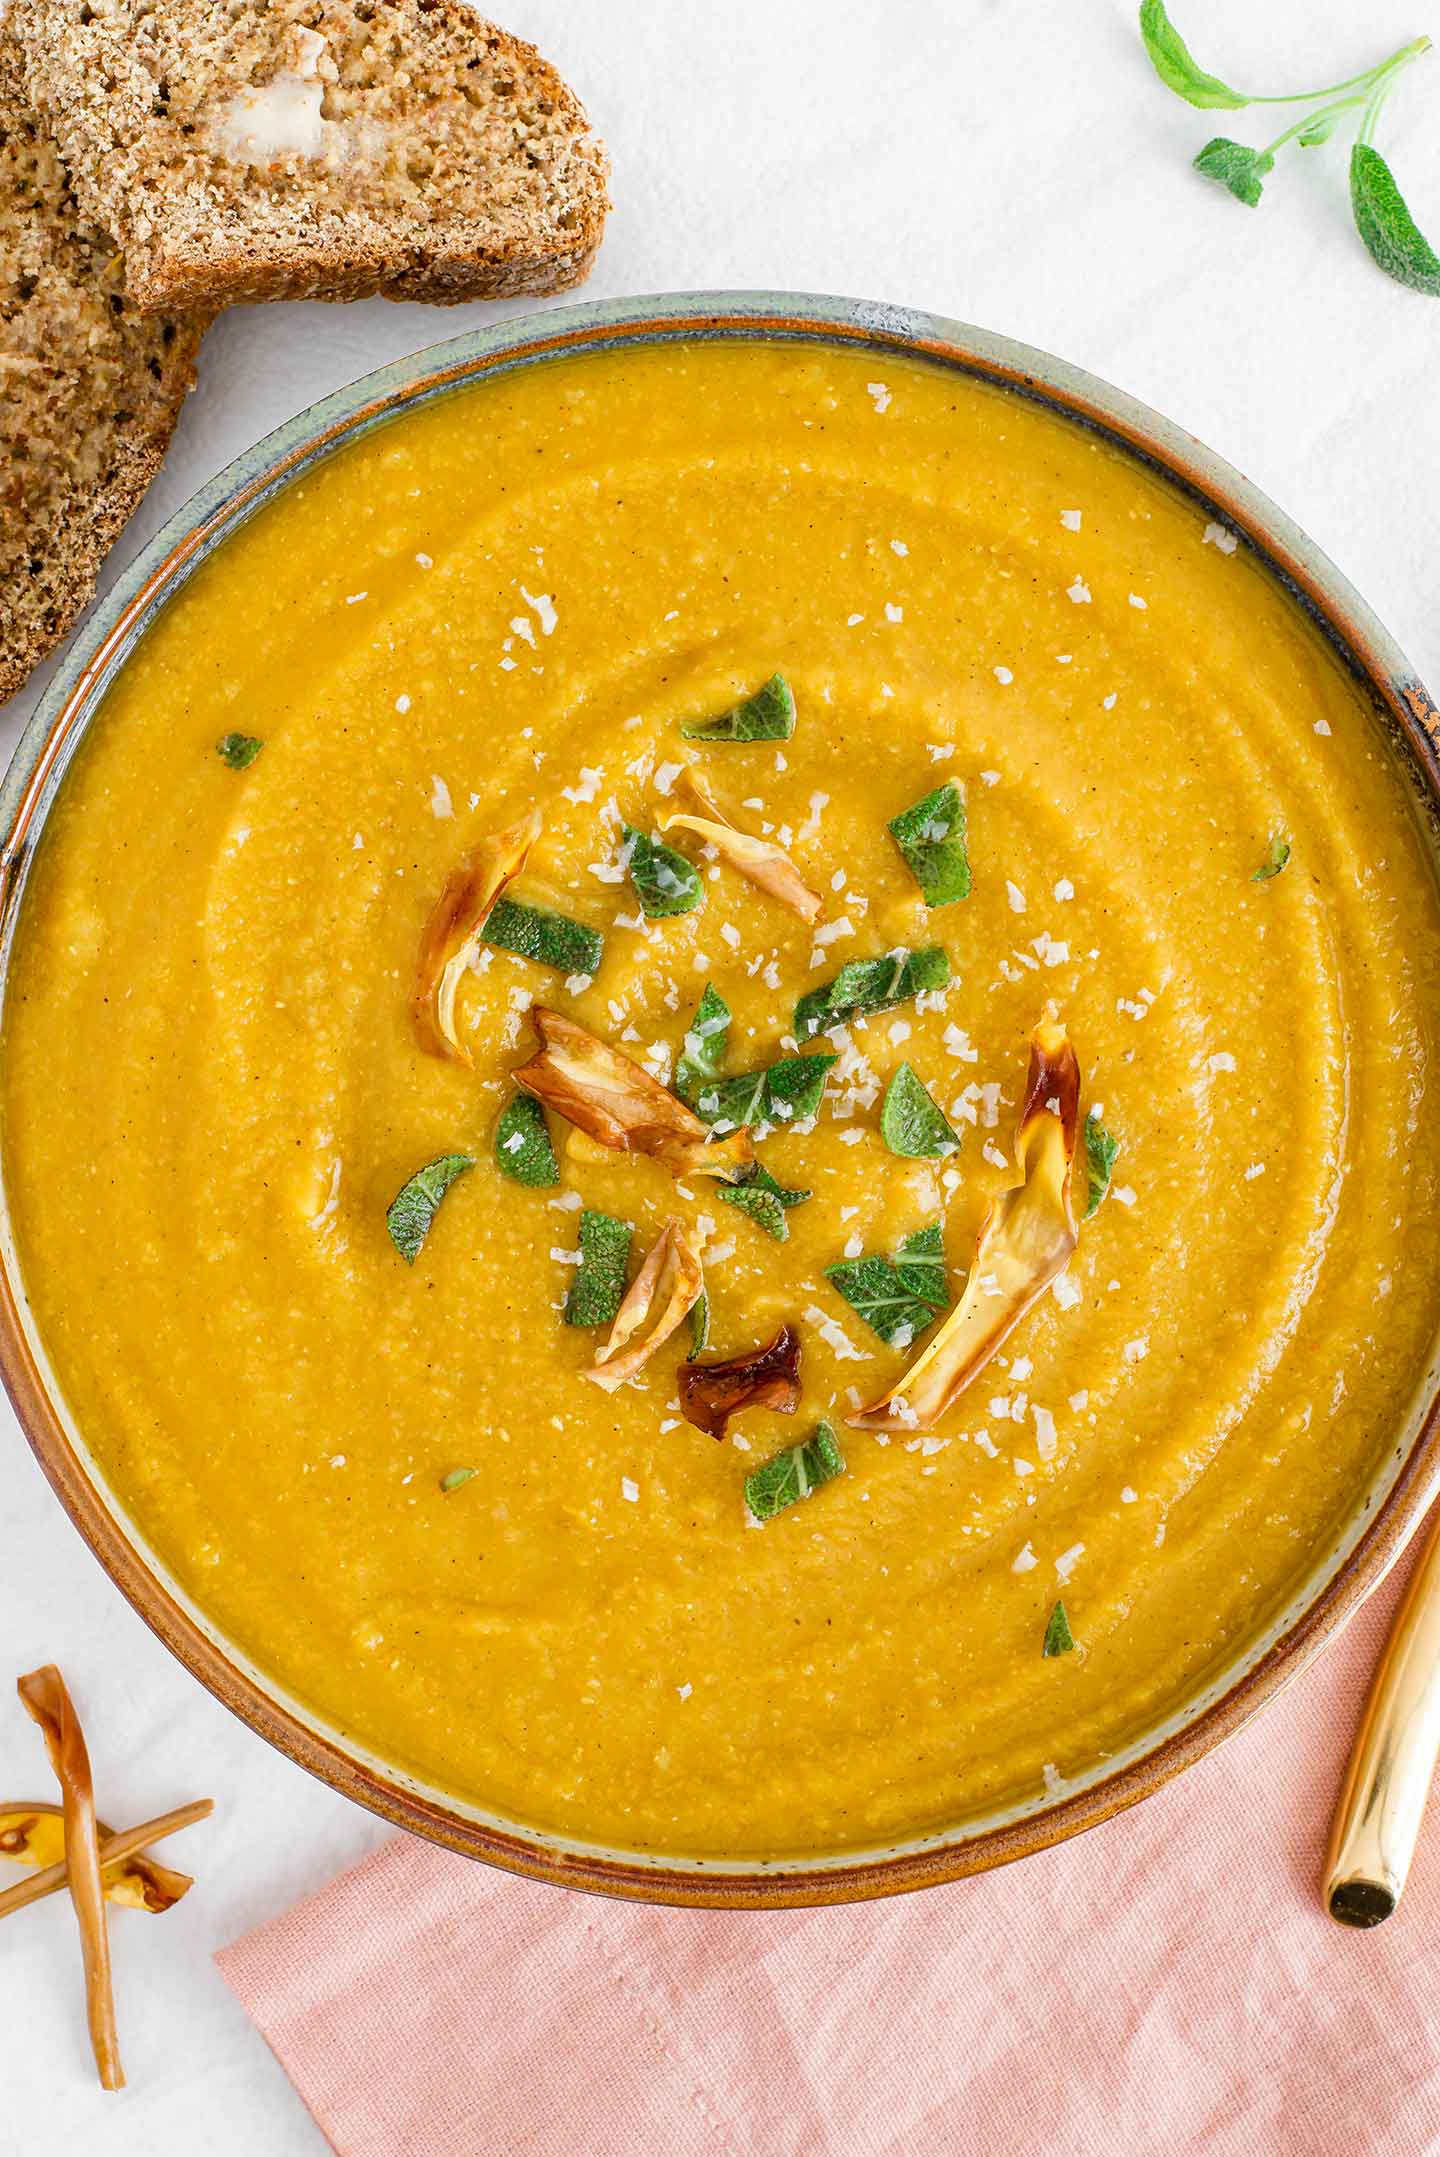 Top down view of a thick and creamy butternut squash red lentil soup in a bowl. The soup is topped with sage and roasted squash peel.